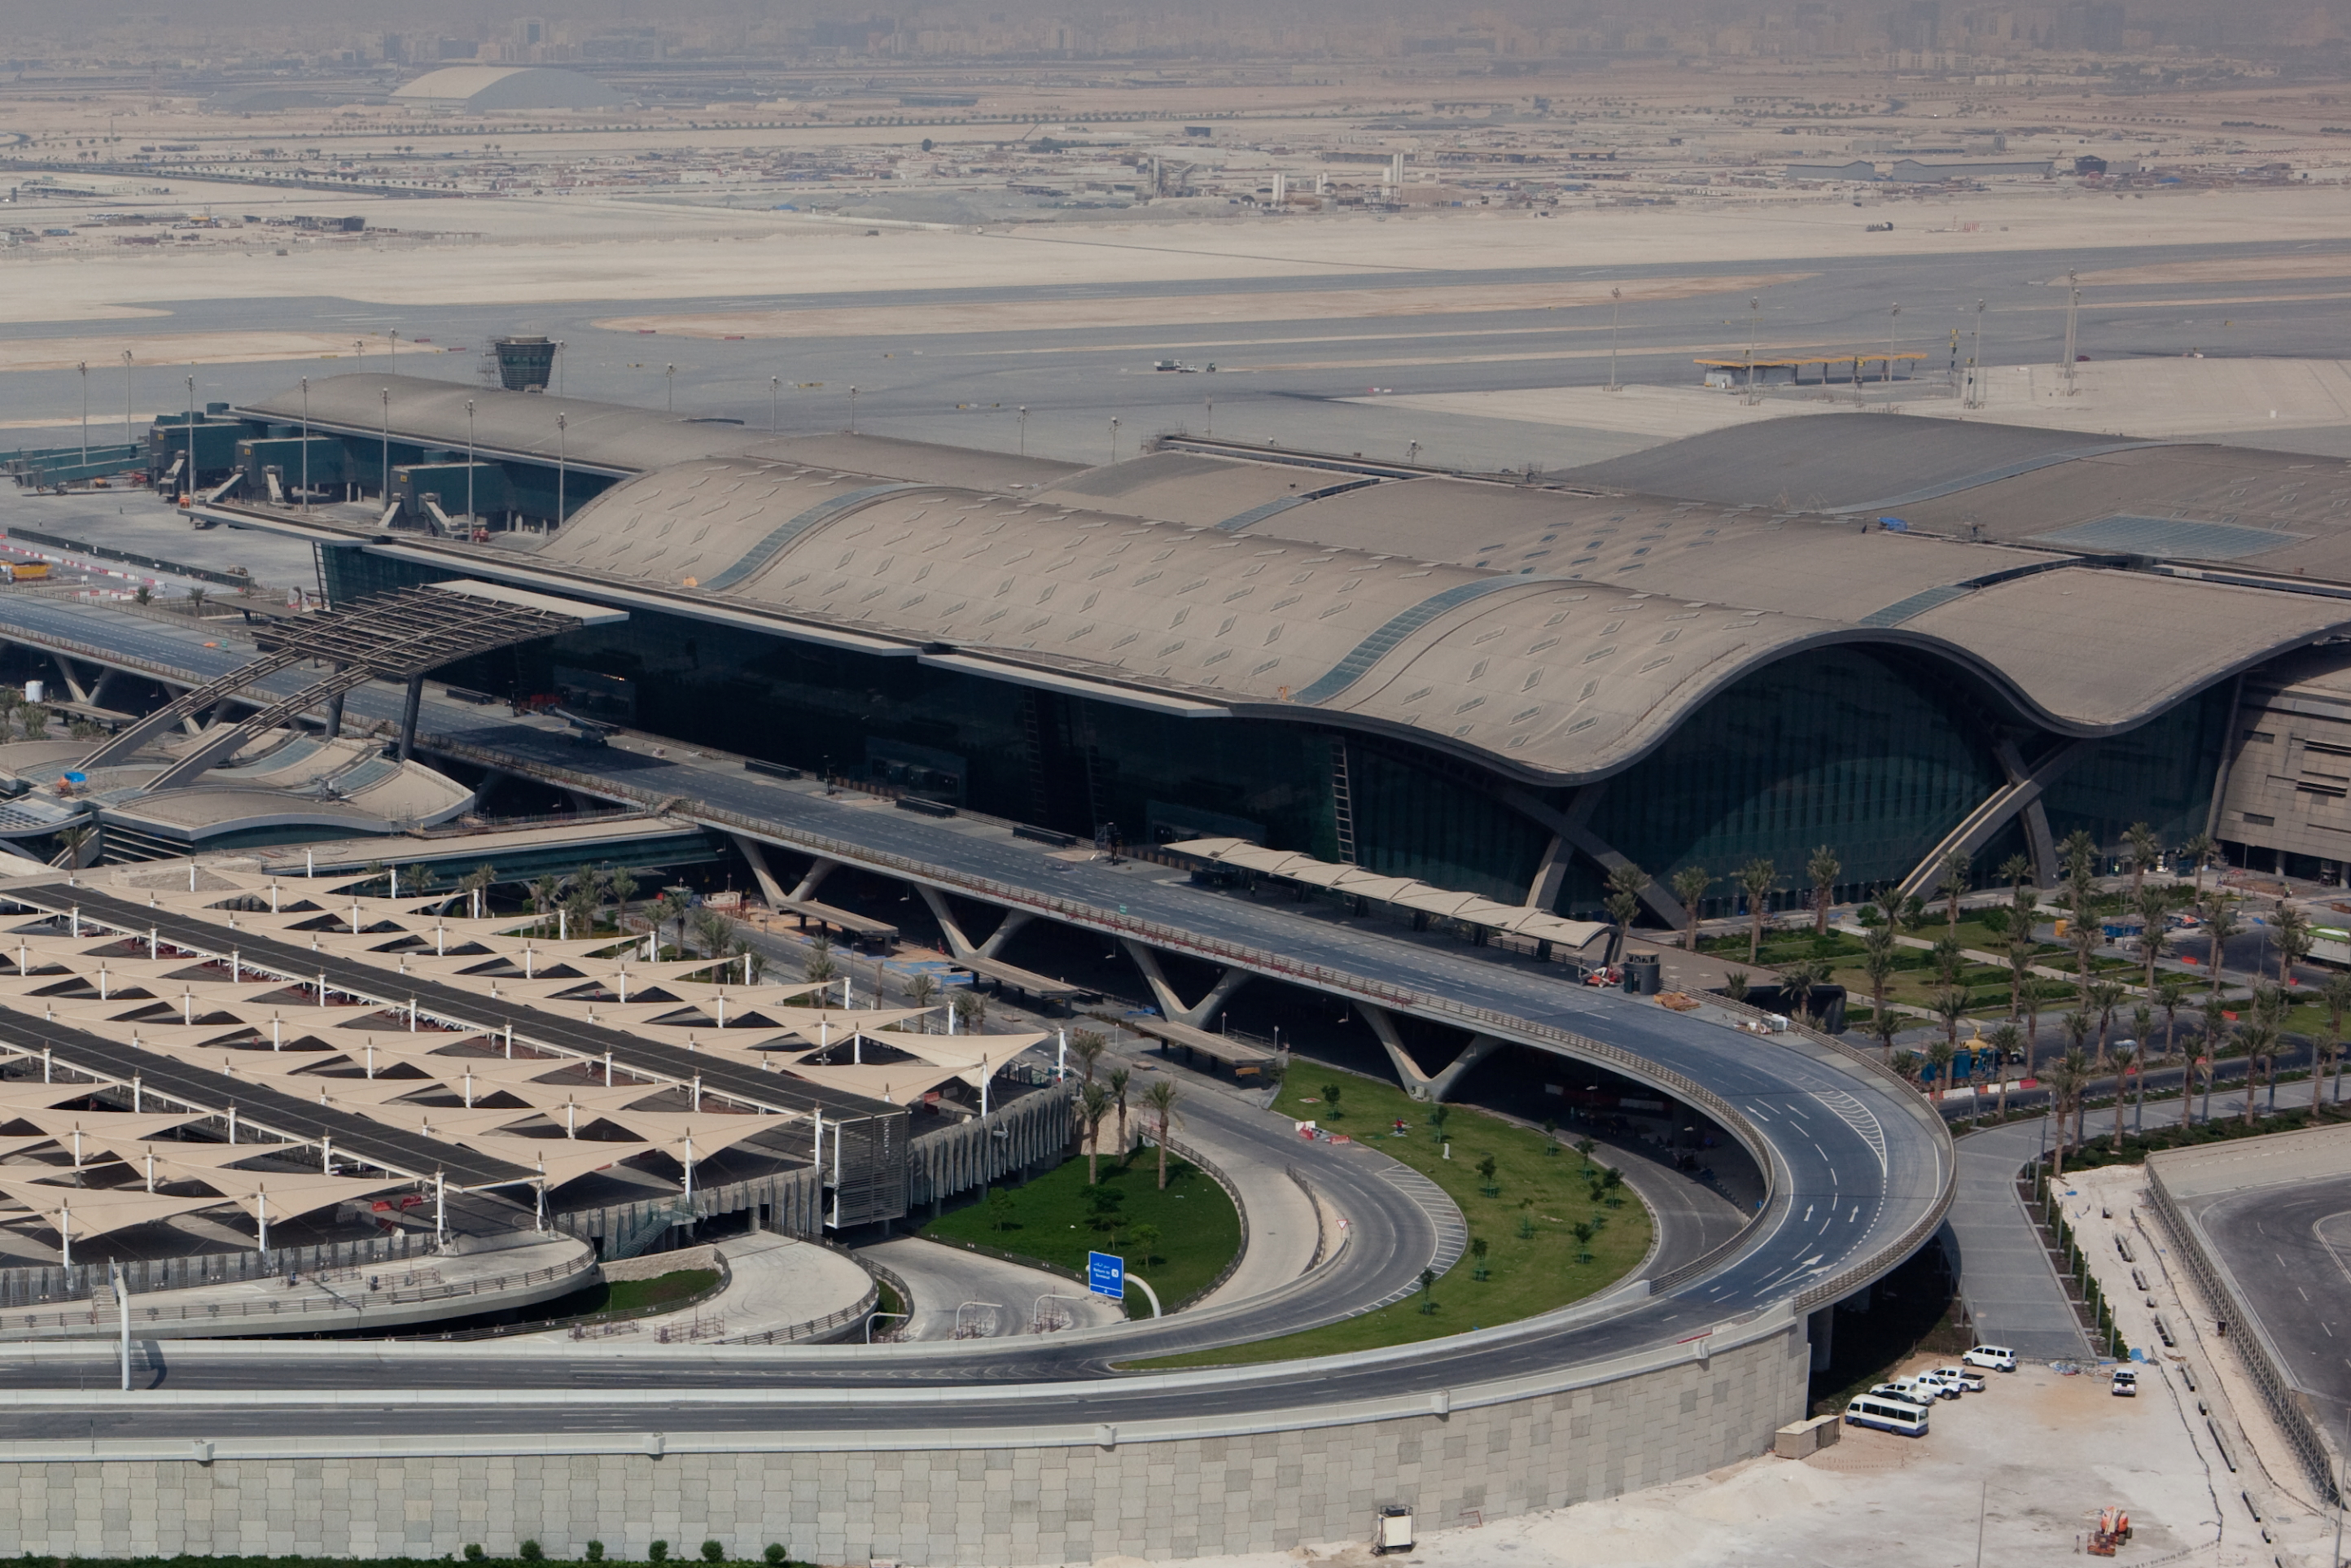 Hamad International Airport (HIA) served a record 38,786,422 passengers in 2019. This represents a year-on-year growth of 12.44% compared to passenger numbers in 2018, and is the most number of passengers the airport has served since the start of operations in 2014.. Click to enlarge.